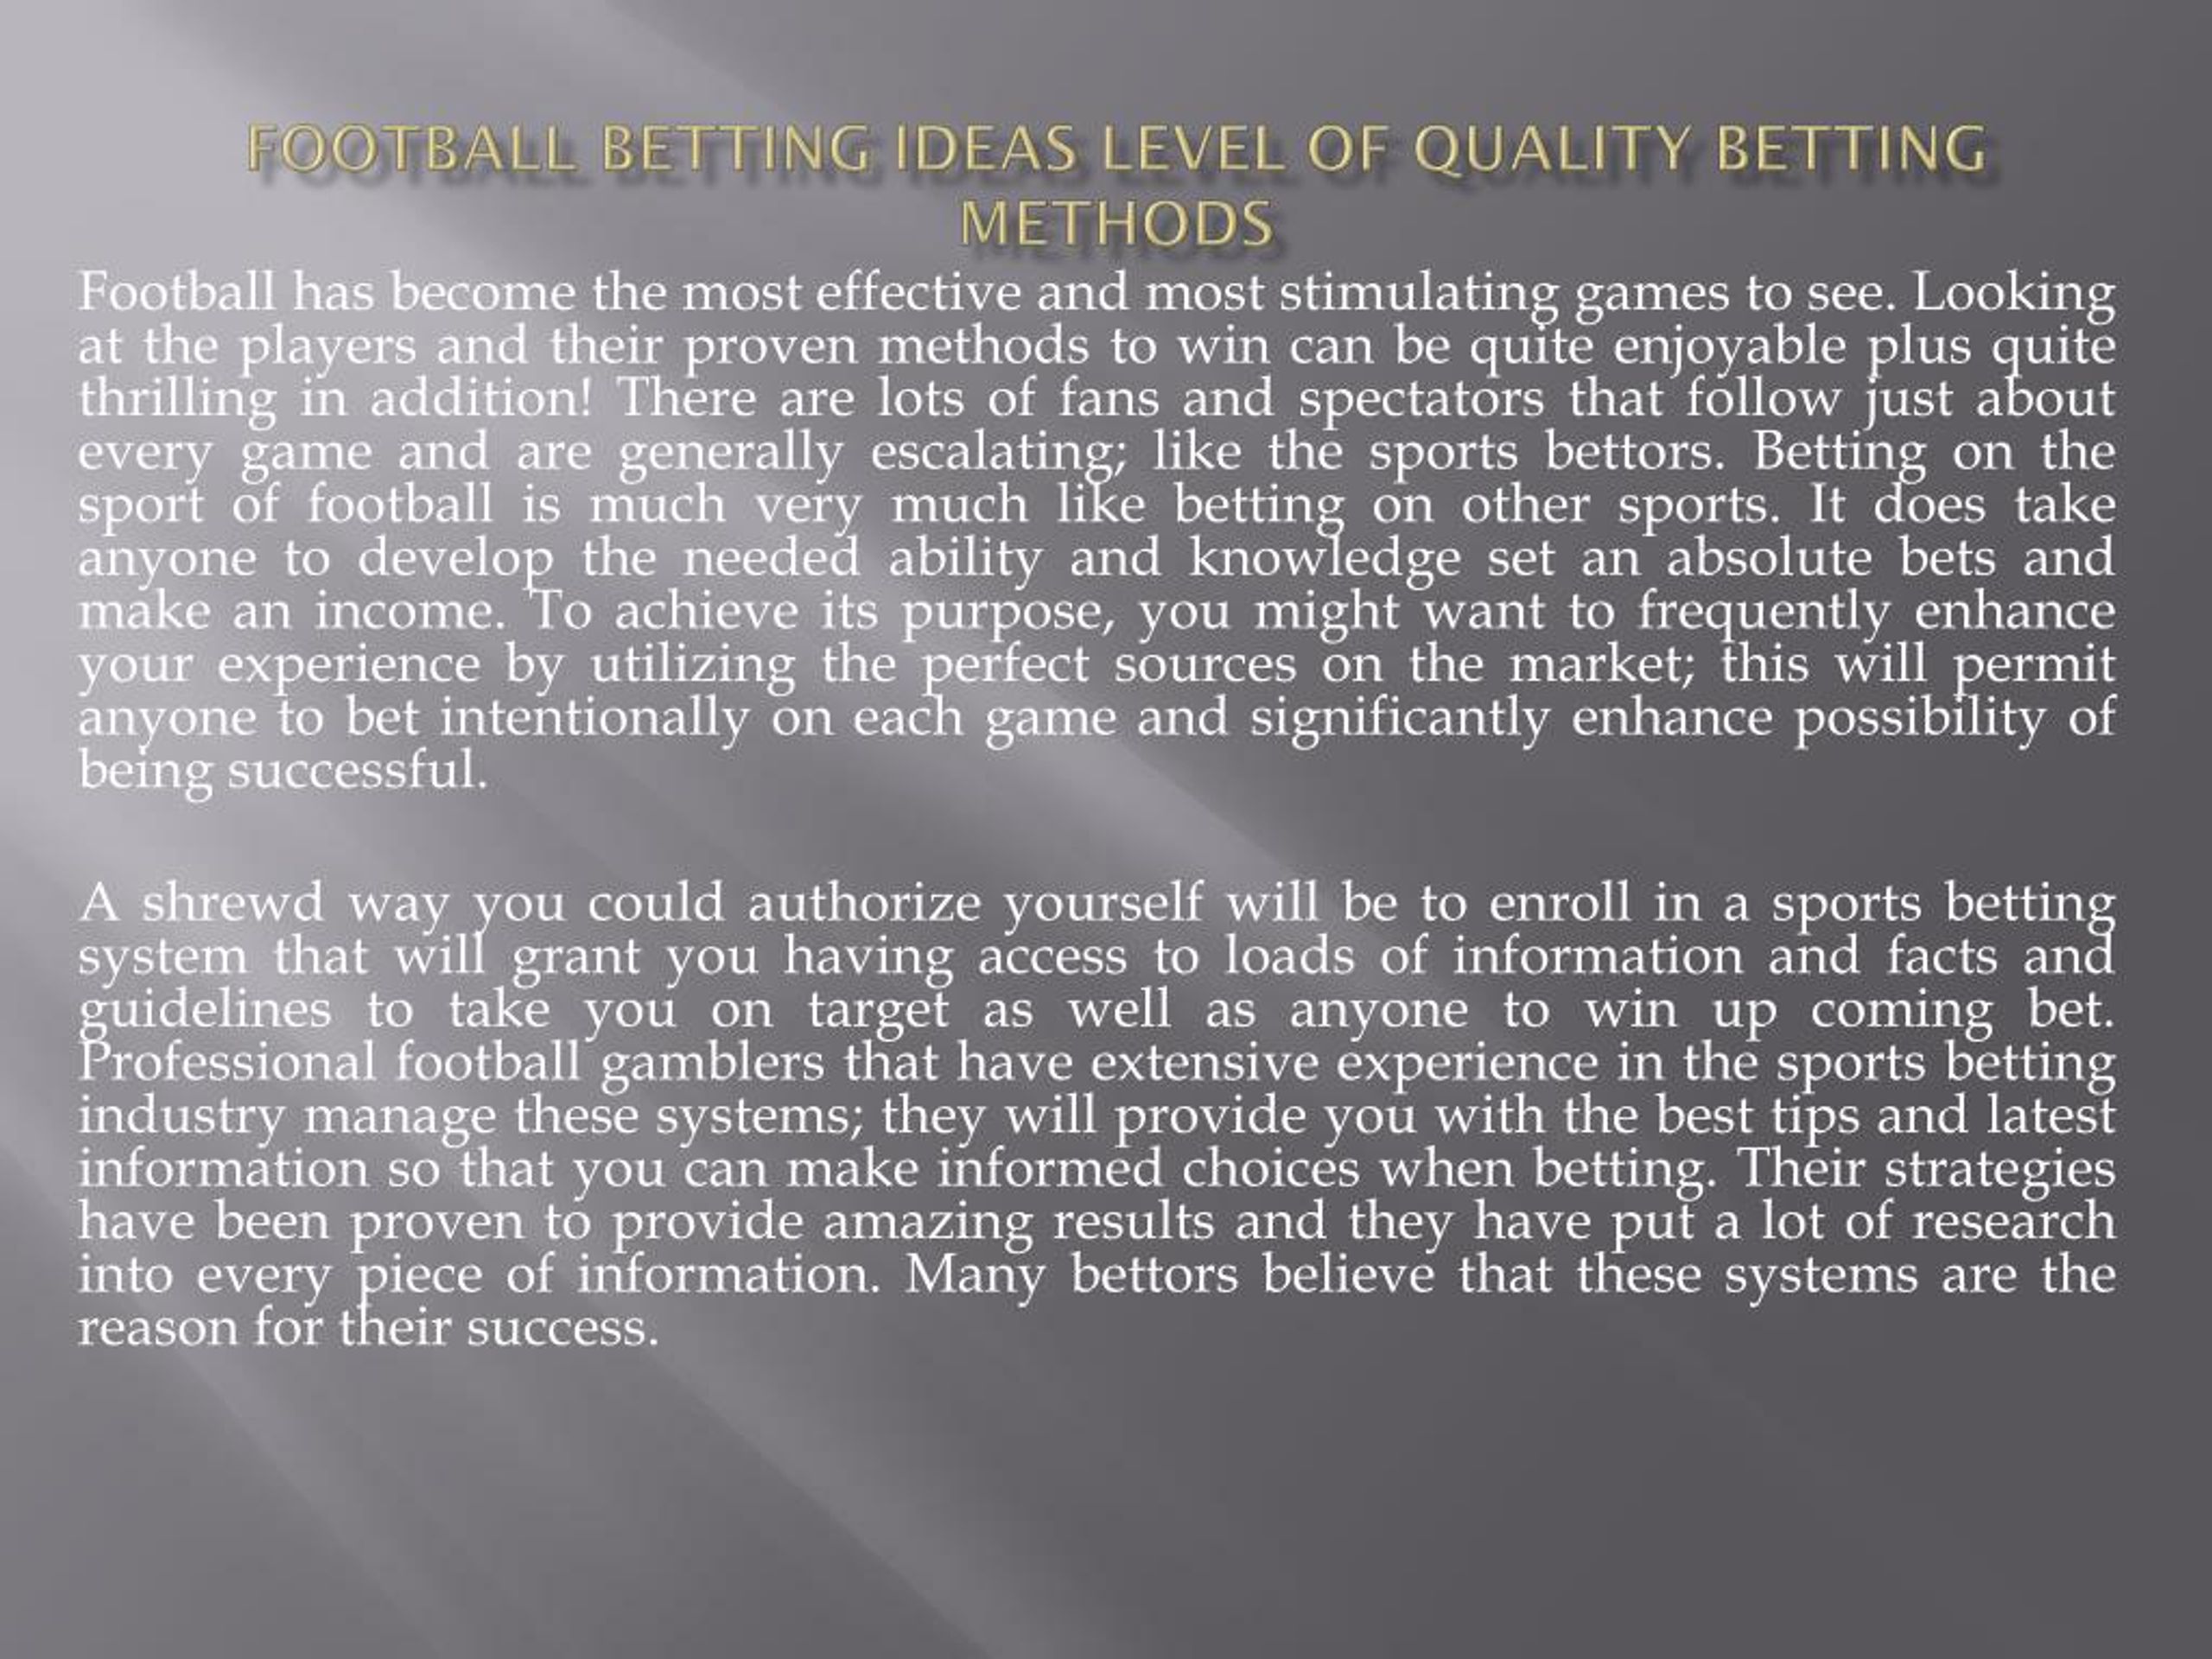 PPT - Football Betting Ideas Level of quality Betting Methods PowerPoint Presentation - ID:7234902